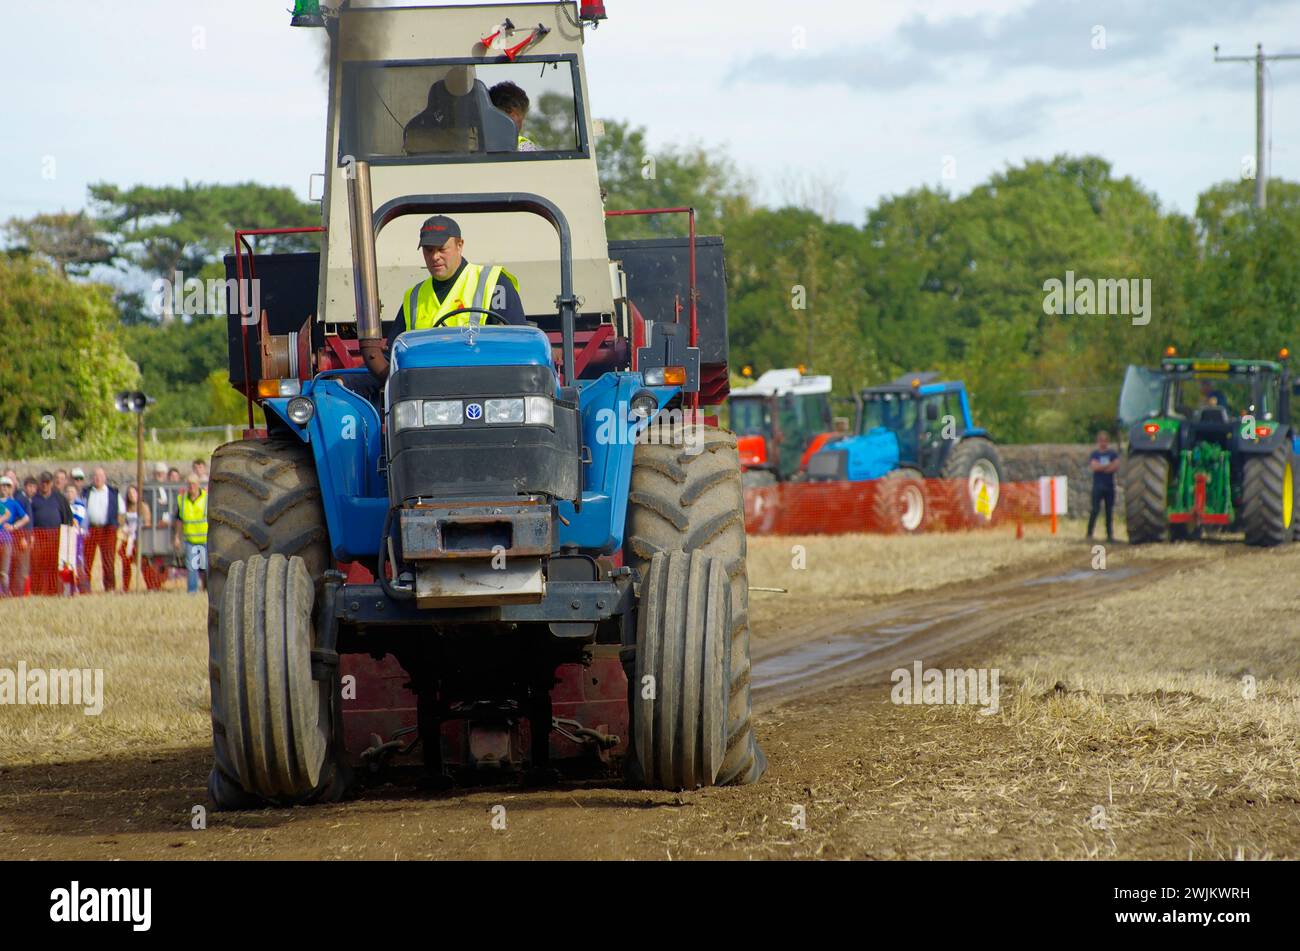 Tractor Pull, Competition, St George, Conwy, North Wales Regno Unito, Foto Stock